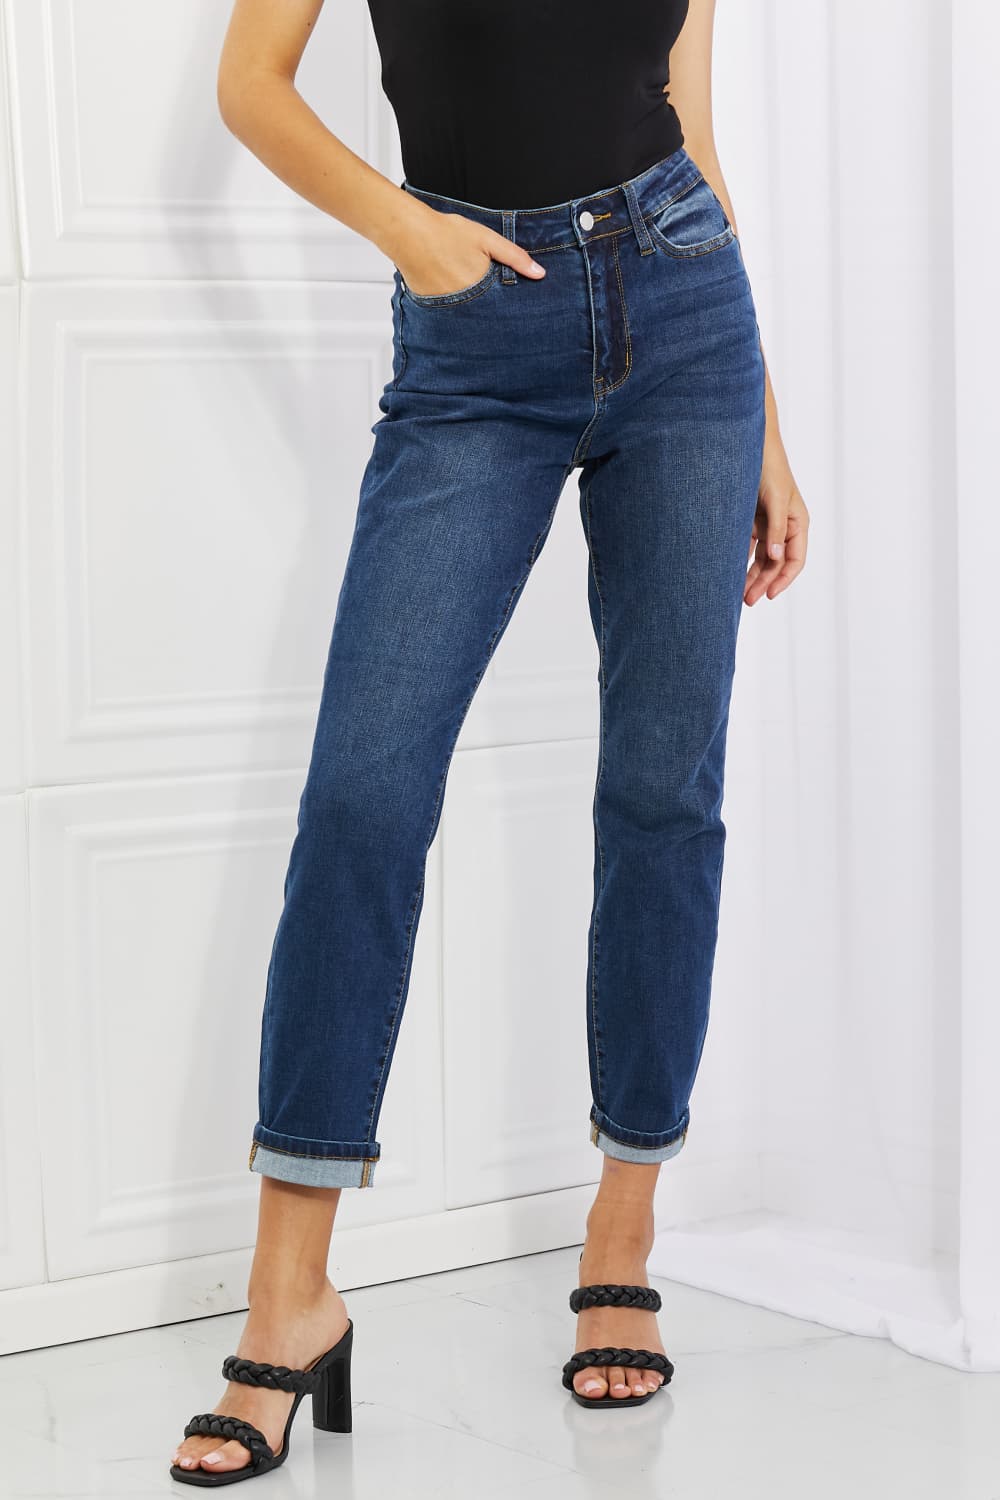 Judy Blue Boyfriend Fit Jeans Style #: 88608 NON-Distressed No Holes No rips No tears Solid Dark Denim Stretchy Jeans Judy Blue Comfortable  Jeans